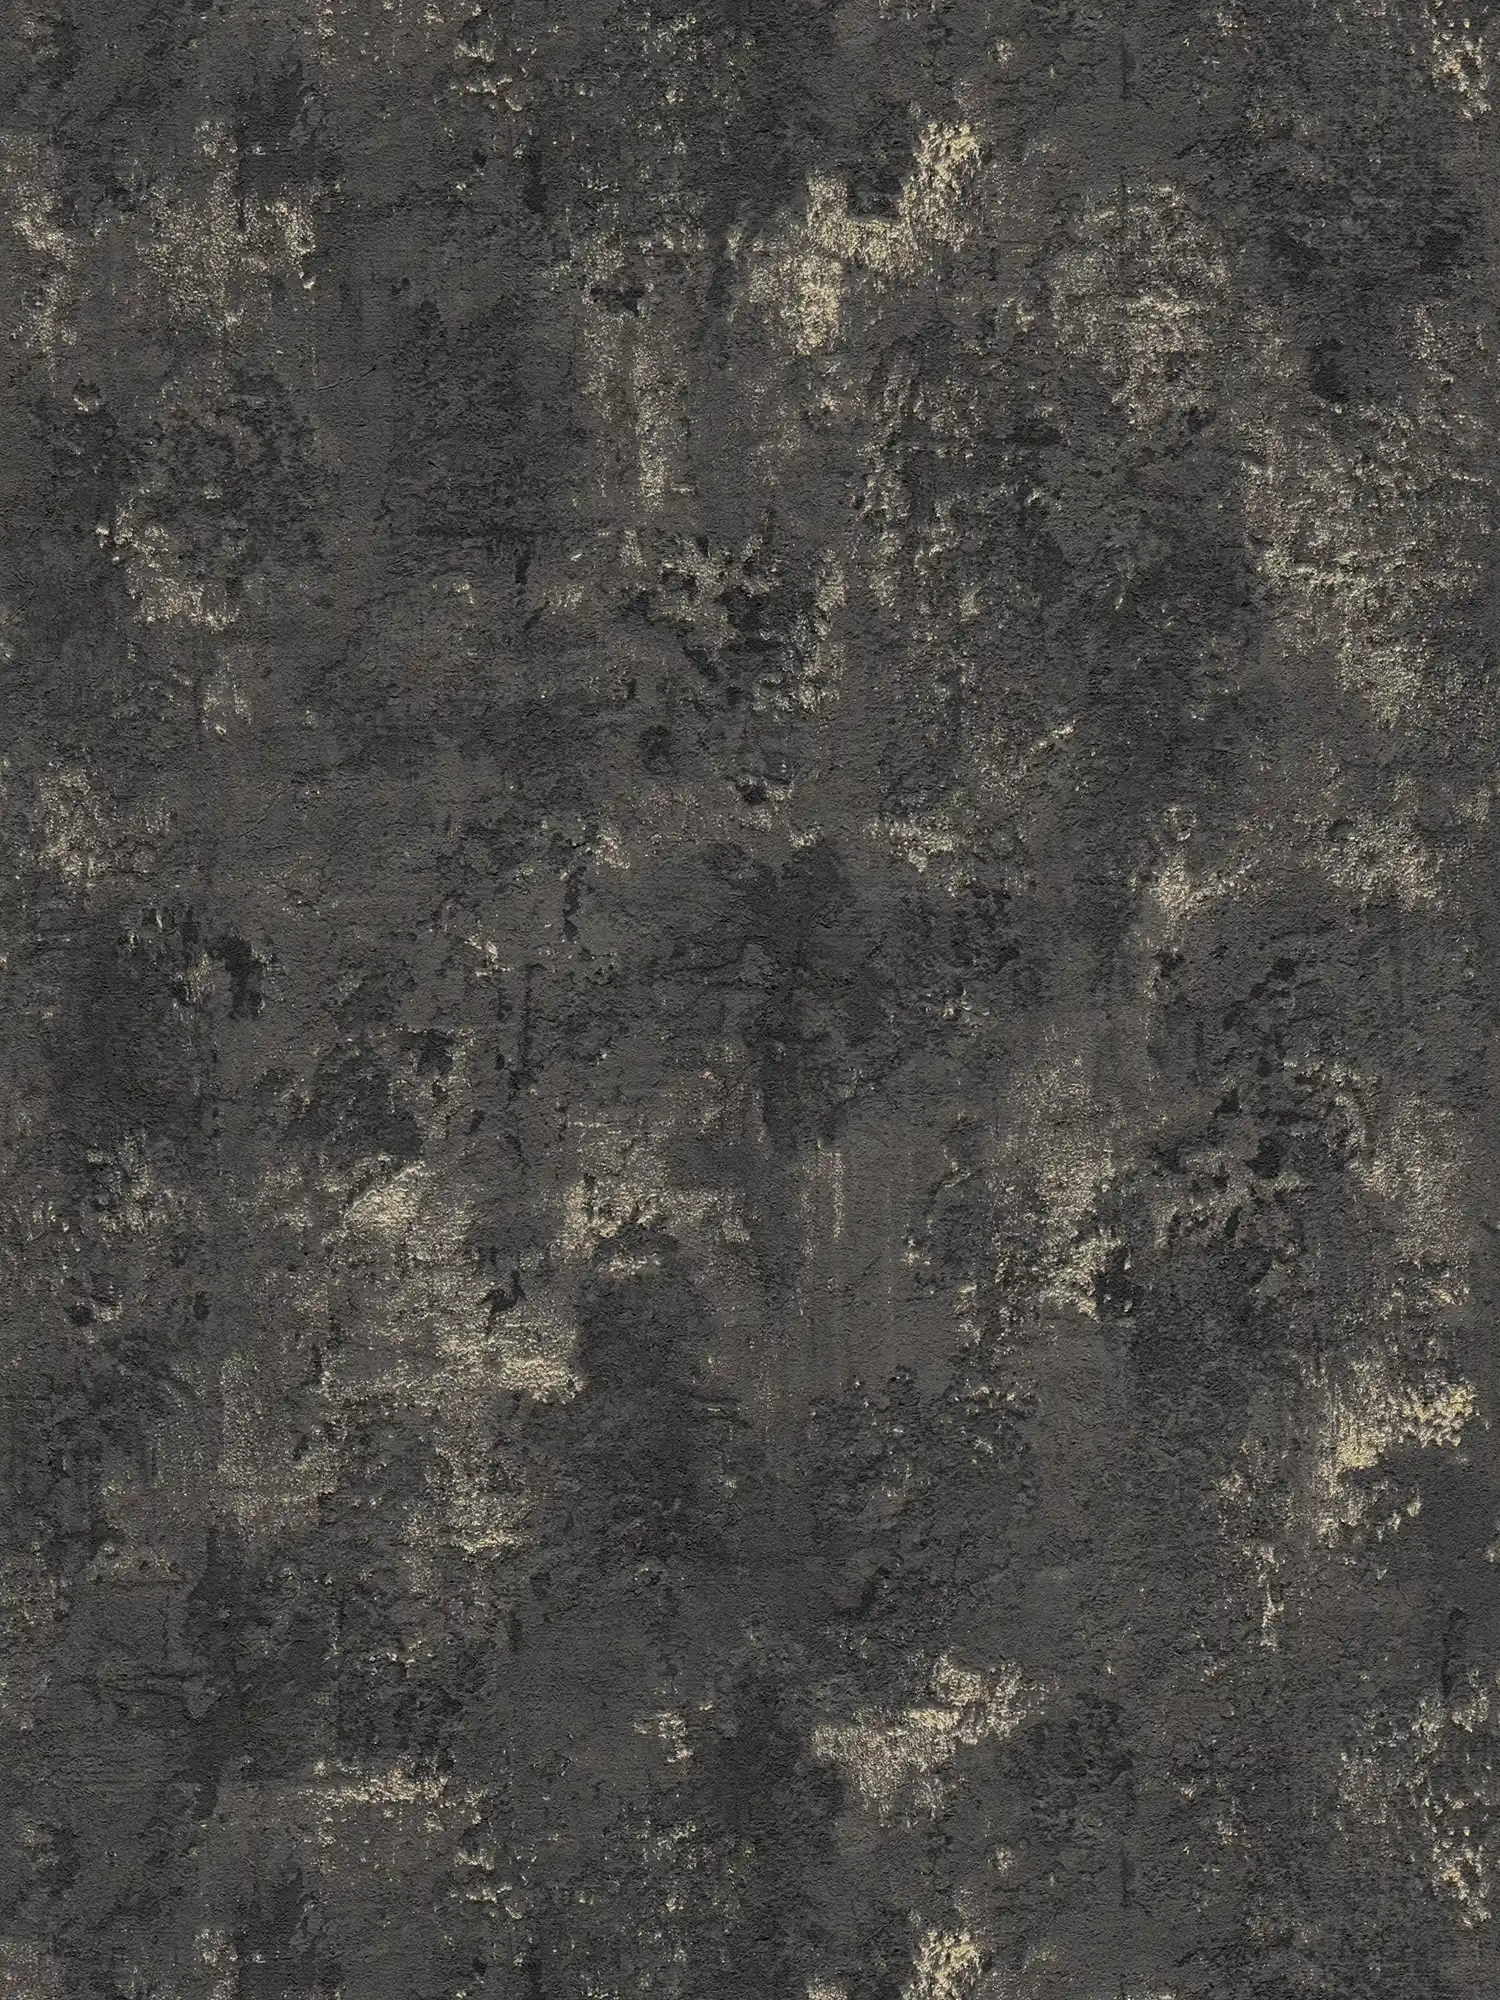 Black textured wallpaper with rustic concrete look
